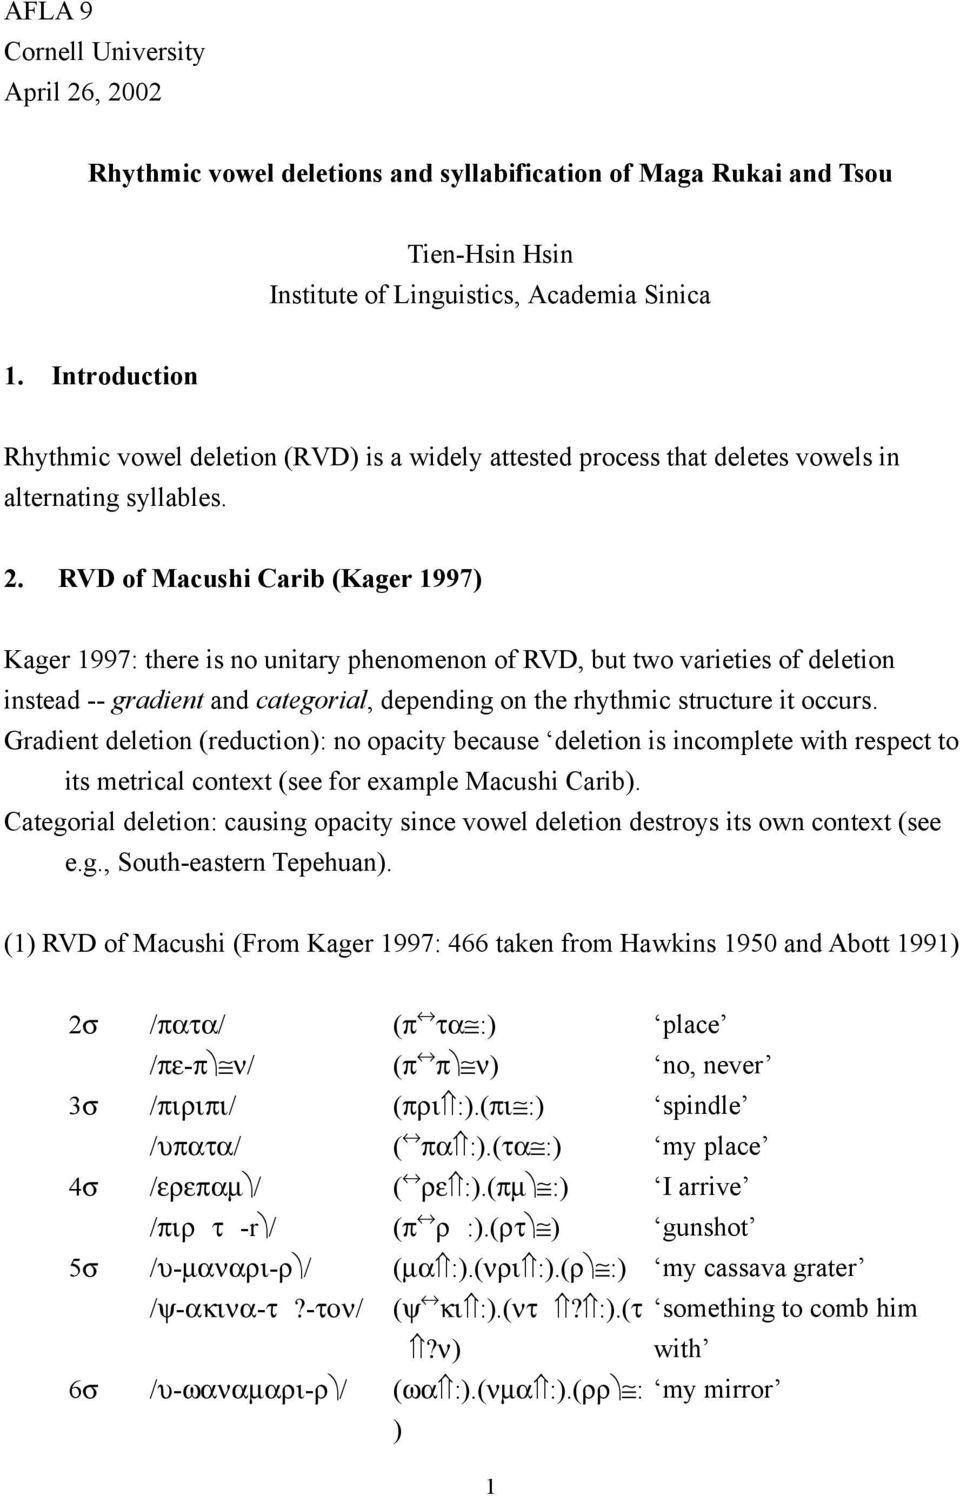 RVD of Macushi Carib (Kager 1997) Kager 1997: there is no unitary phenomenon of RVD, but two varieties of deletion instead -- gradient and categorial, depending on the rhythmic structure it occurs.